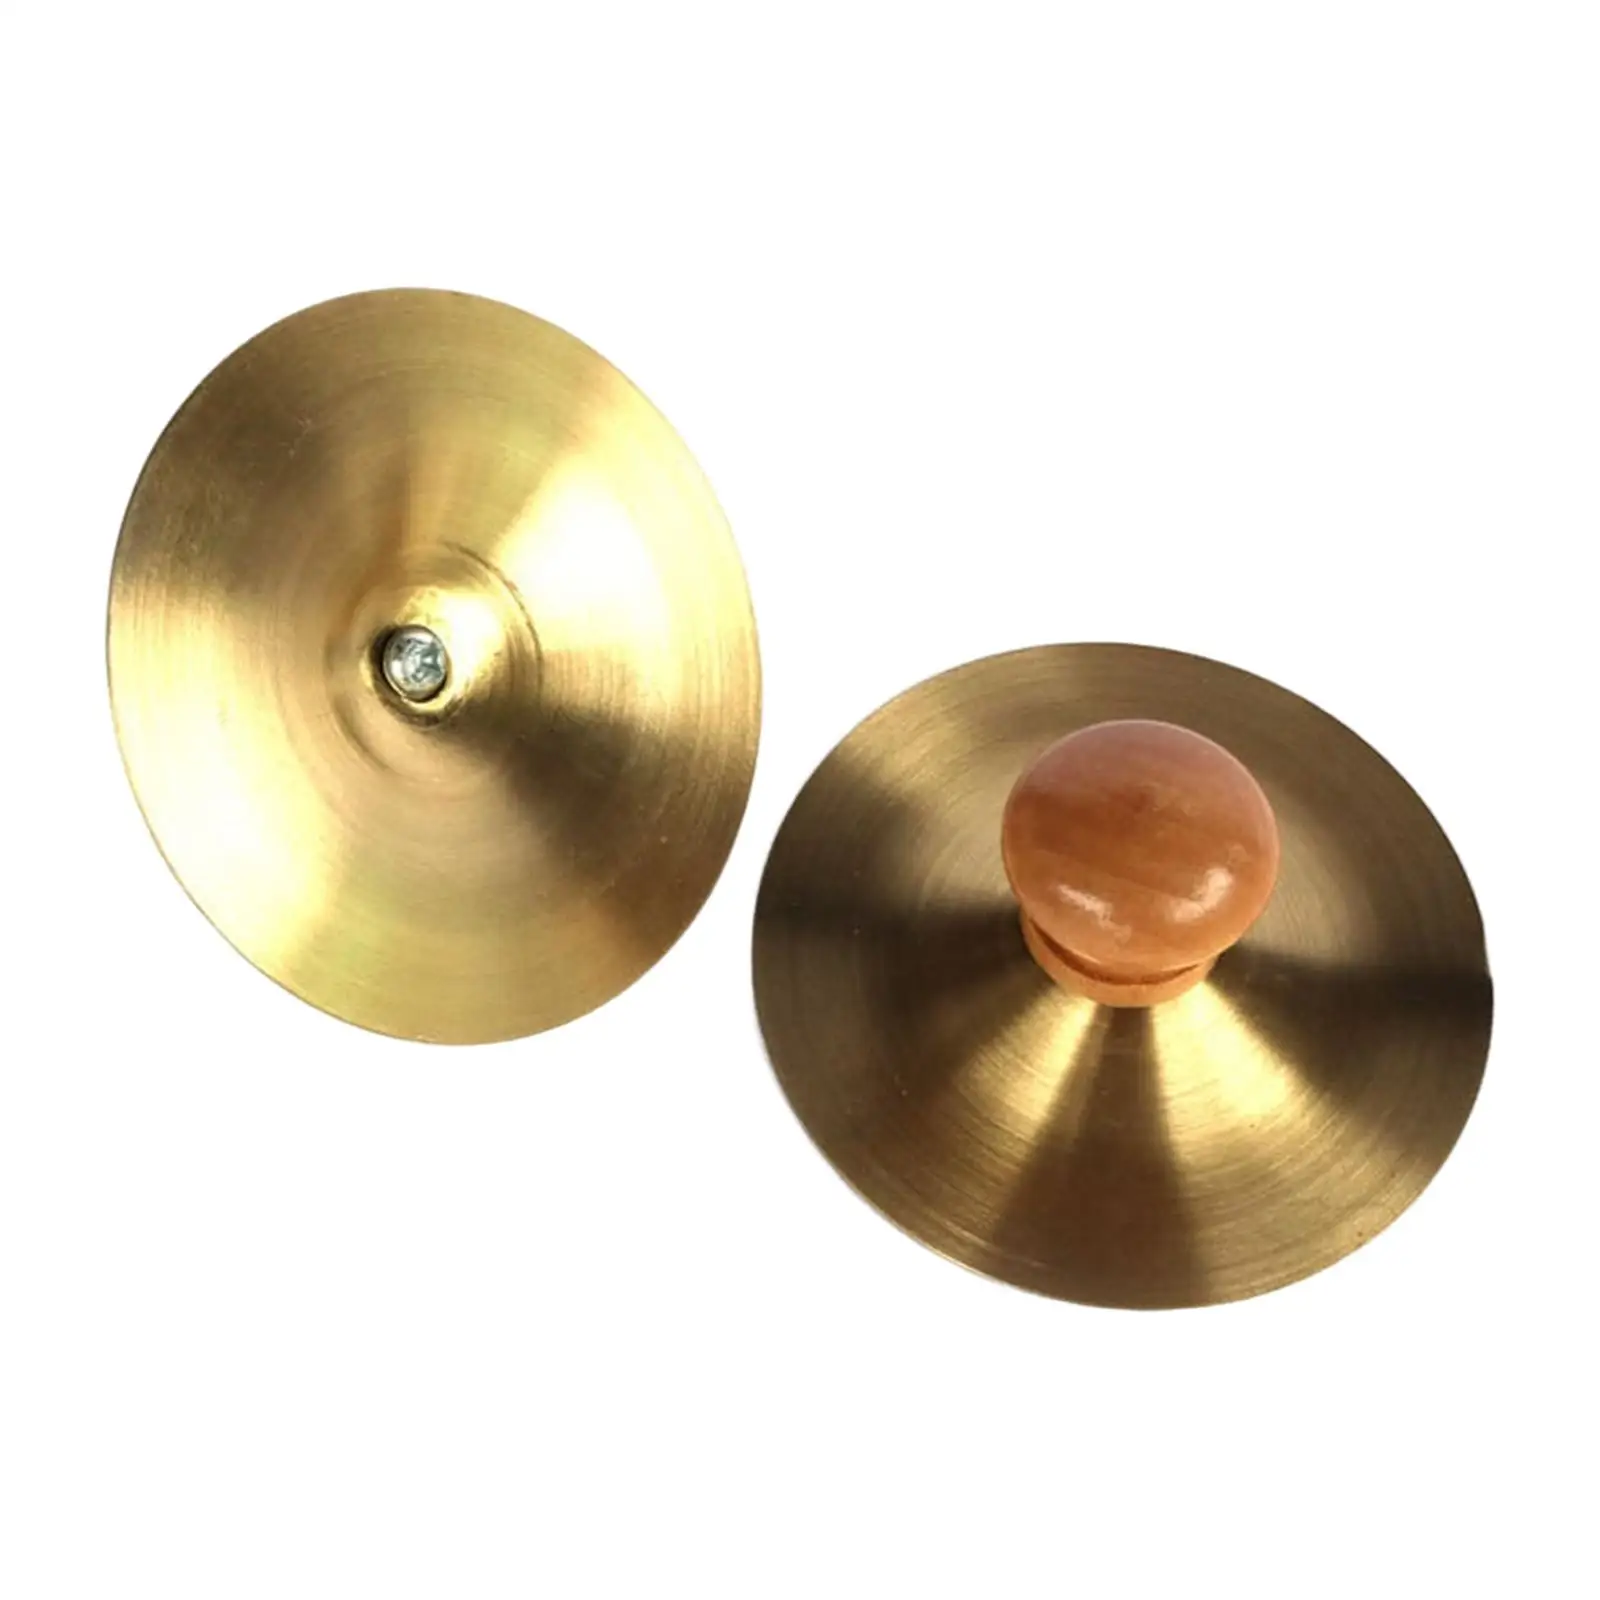 Finger Cymbals Kids Toy Developmental Early Learning Hand Eye Coordination Educational Copper Hand Cymbals for Children Gifts